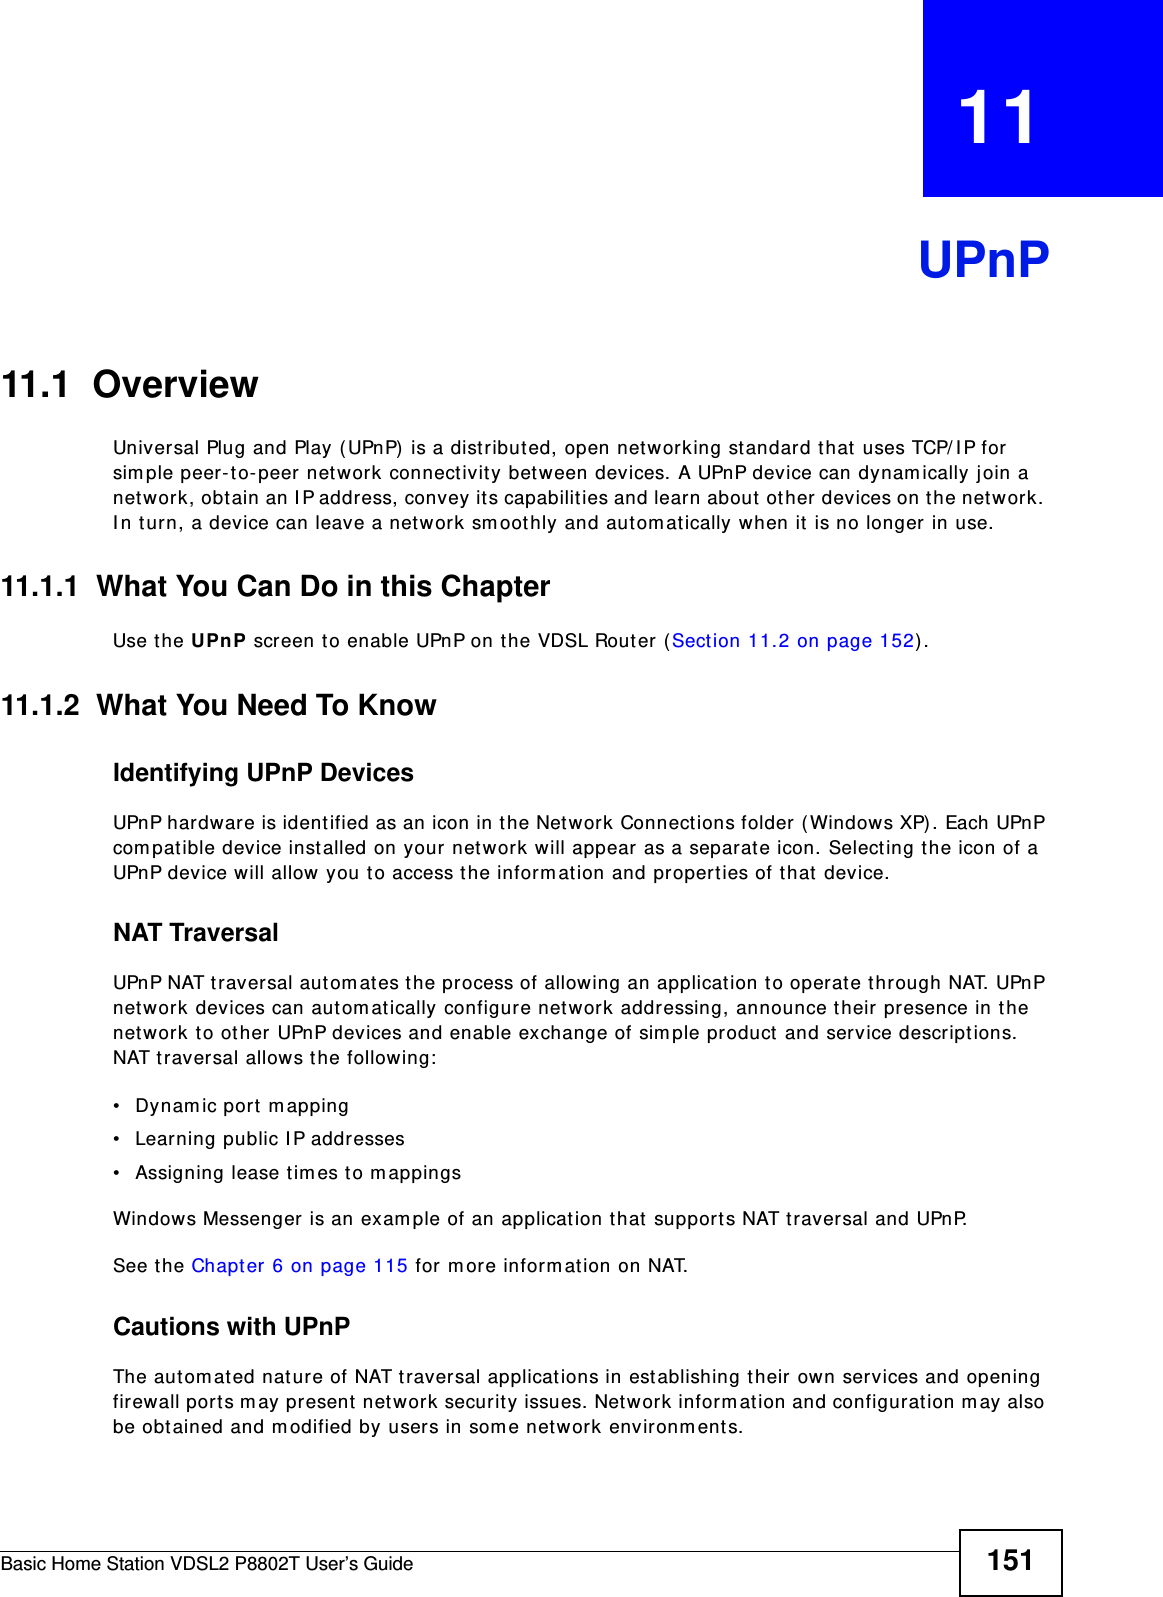 Basic Home Station VDSL2 P8802T User’s Guide 151CHAPTER   11UPnP11.1  OverviewUniversal Plug and Play (UPnP)  is a dist ributed, open net working standard t hat  uses TCP/ I P for sim ple peer-to-peer net work connectivity between devices. A UPnP device can dynam ically join a net work, obt ain an I P address, convey it s capabilities and learn about  other devices on t he net work. I n t urn, a device can leave a net work sm oot hly and aut om at ically when it  is no longer in use.11.1.1  What You Can Do in this ChapterUse t he UPnP screen to enable UPnP on the VDSL Router (Sect ion 11.2 on page 152) .11.1.2  What You Need To KnowIdentifying UPnP DevicesUPnP hardware is ident ified as an icon in the Net work Connections folder (Windows XP) . Each UPnP com pat ible device installed on your net work will appear as a separate icon. Selecting the icon of a UPnP device will allow you t o access the inform at ion and properties of t hat  device. NAT TraversalUPnP NAT traversal aut omat es the process of allowing an applicat ion to operate through NAT. UPnP net work devices can autom atically configure net work addressing, announce t heir presence in the net work t o other UPnP devices and enable exchange of sim ple product  and service descript ions. NAT traversal allows t he following:• Dynam ic port m apping• Lear ning public I P addresses• Assigning lease t im es to m appingsWindows Messenger is an exam ple of an application t hat  supports NAT traversal and UPnP. See t he Chapter 6 on page 115 for m or e inform ation on NAT.Cautions with UPnPThe aut om at ed nat ure of NAT traversal applications in est ablishing t heir own services and opening firewall port s m ay present  net work security issues. Net work inform at ion and configuration m ay also be obt ained and m odified by users in some net work environm ents. 